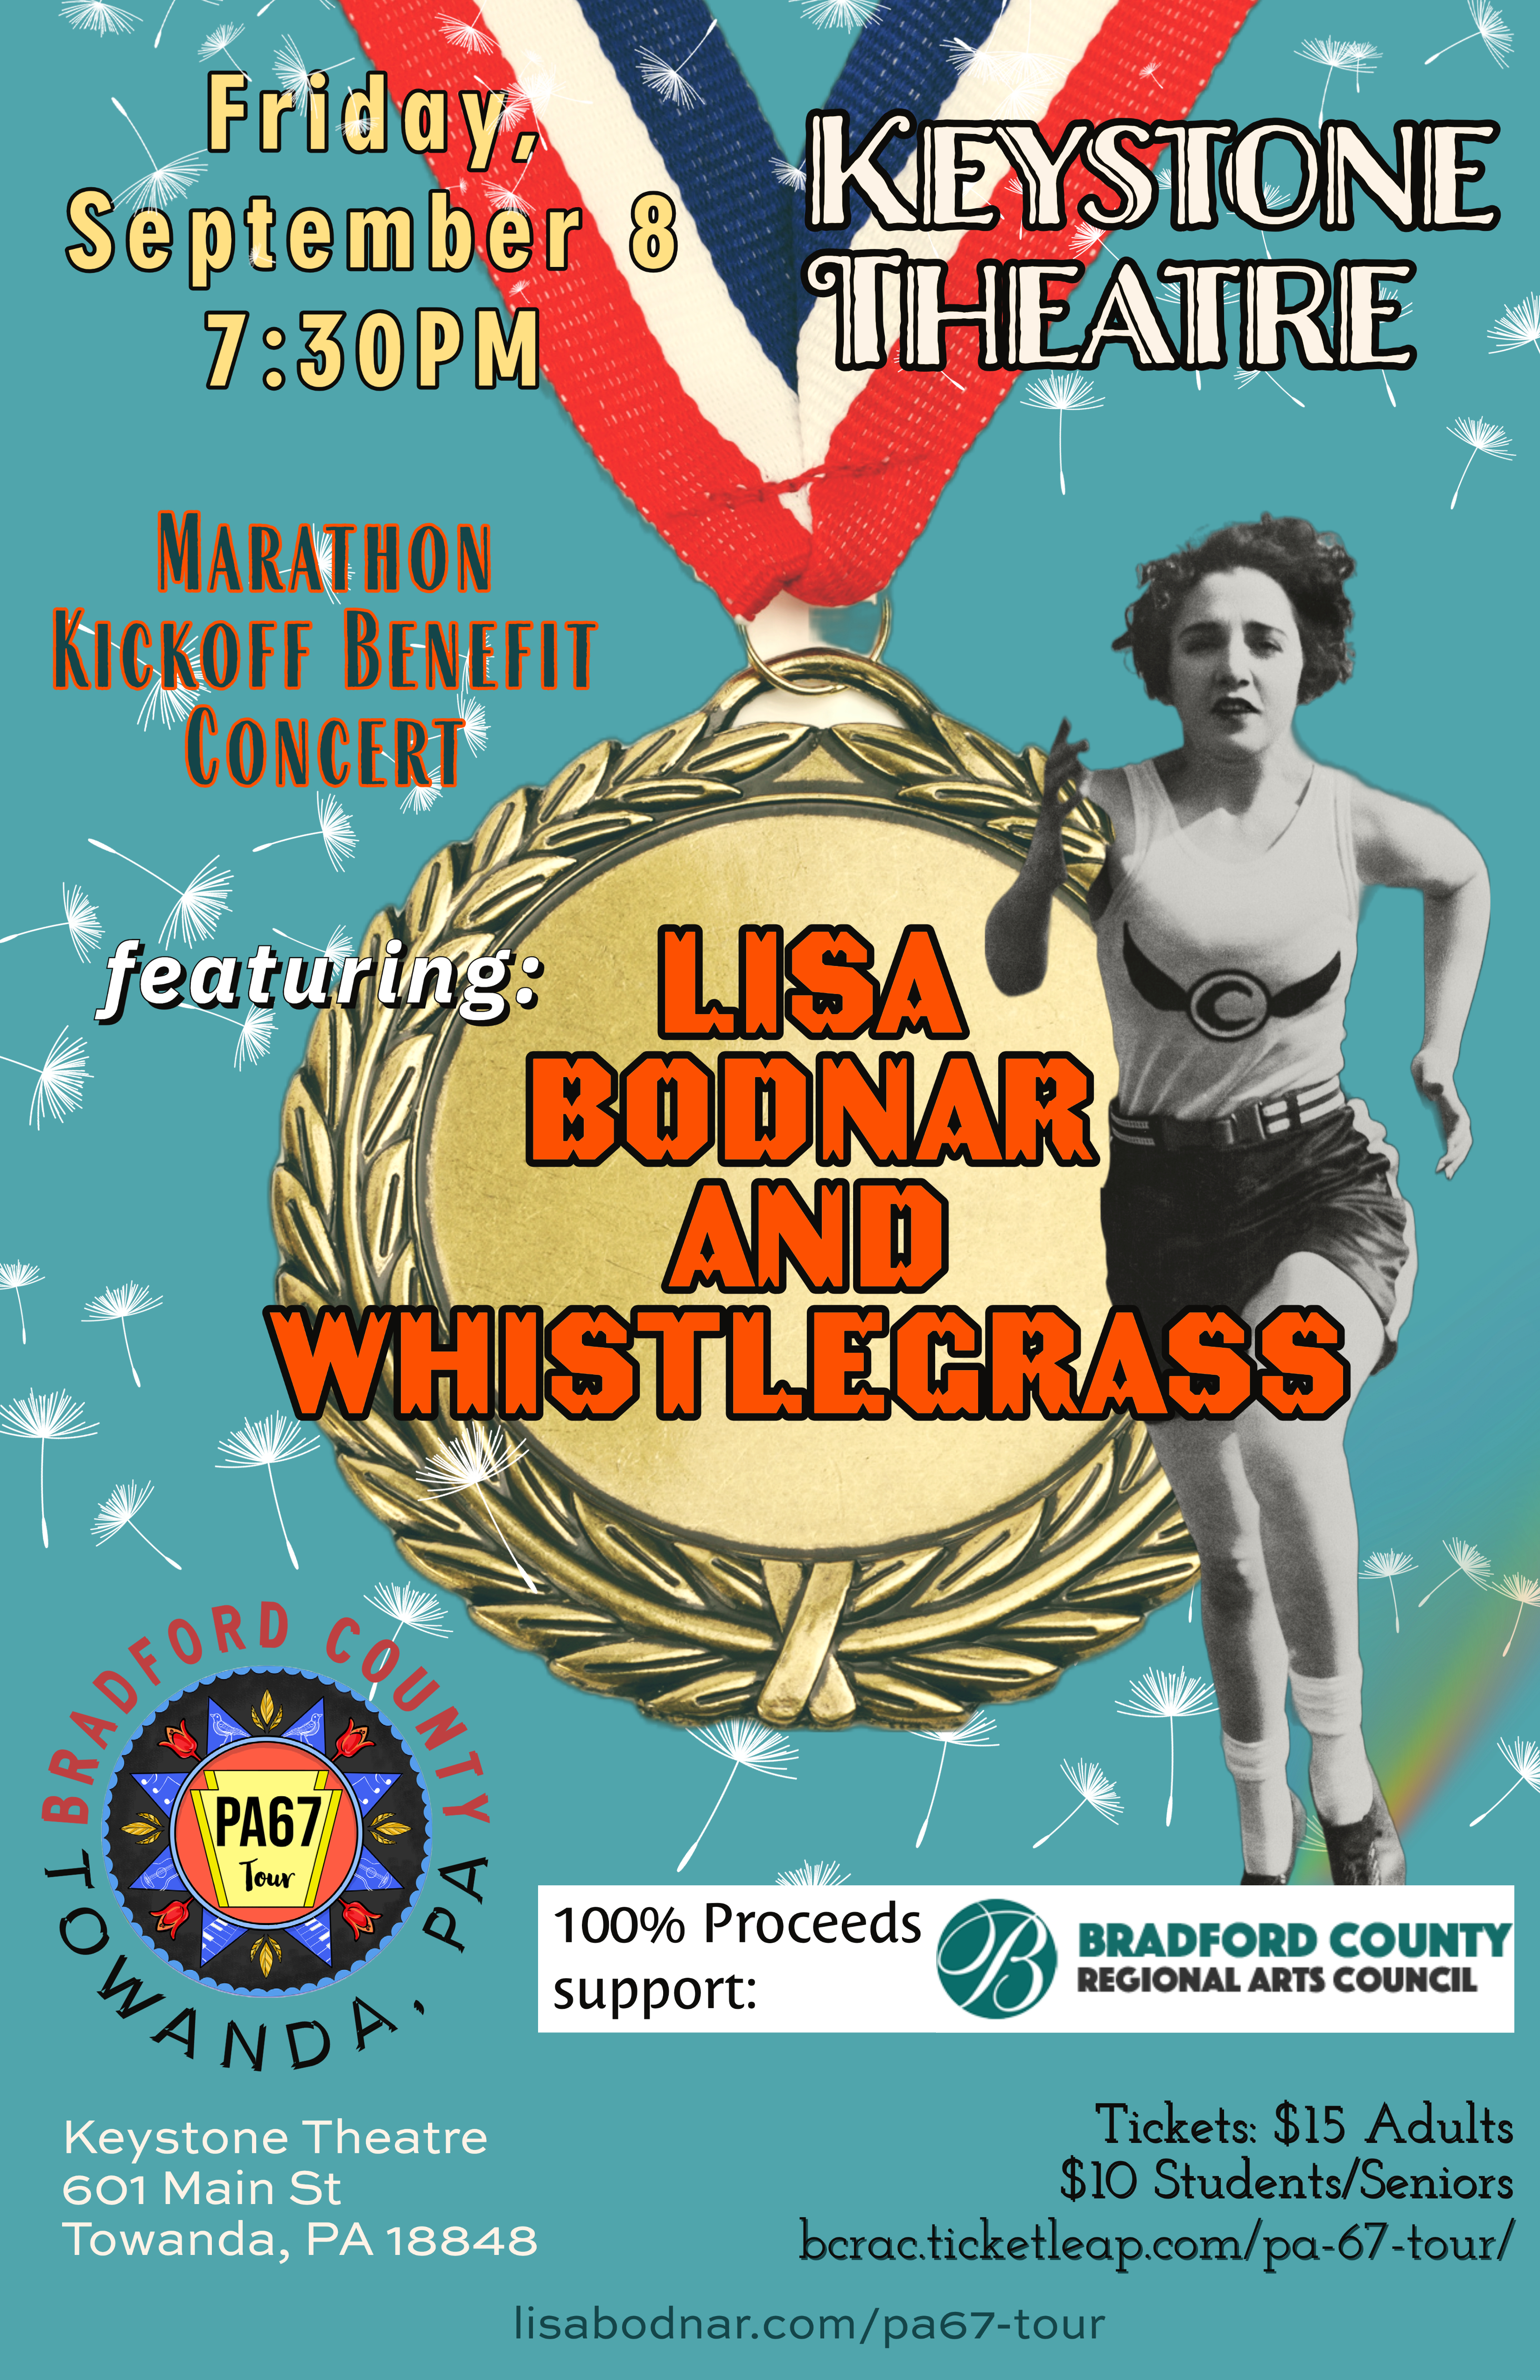 Lisa Bodnar and Whistlegrass PA67 Tour lands in Bradford County on September 8 at the Keystone Theatre in Towanda.